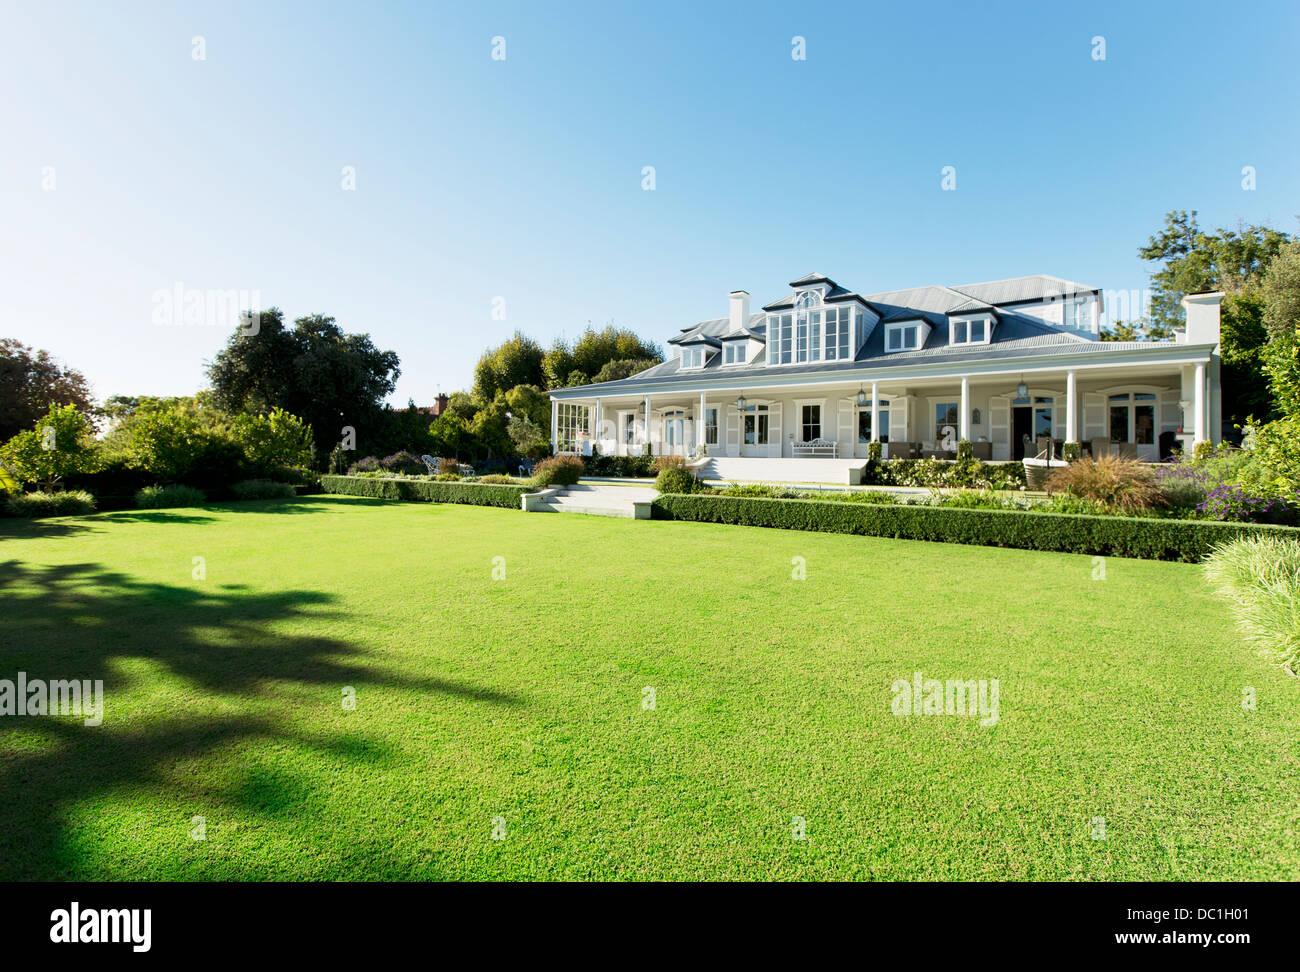 Luxury house facing sunny lawn Stock Photo